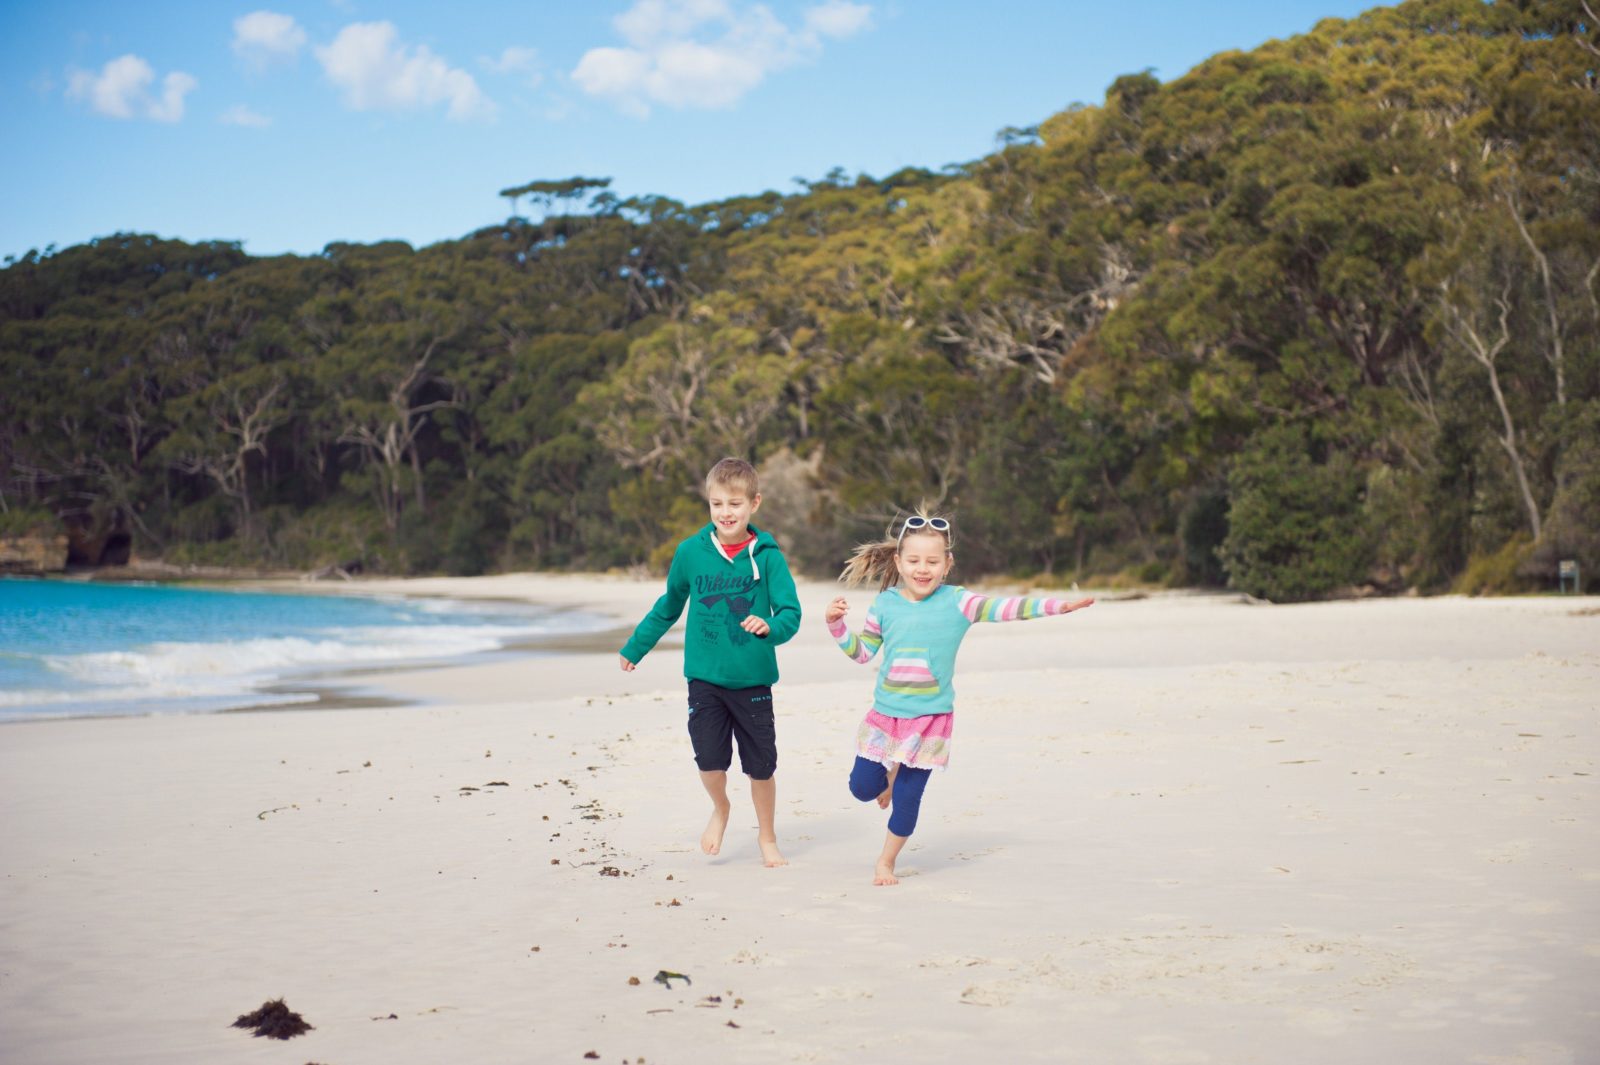 Kids at Murrays Beach. Image courtesy of Tourism Shoalhaven